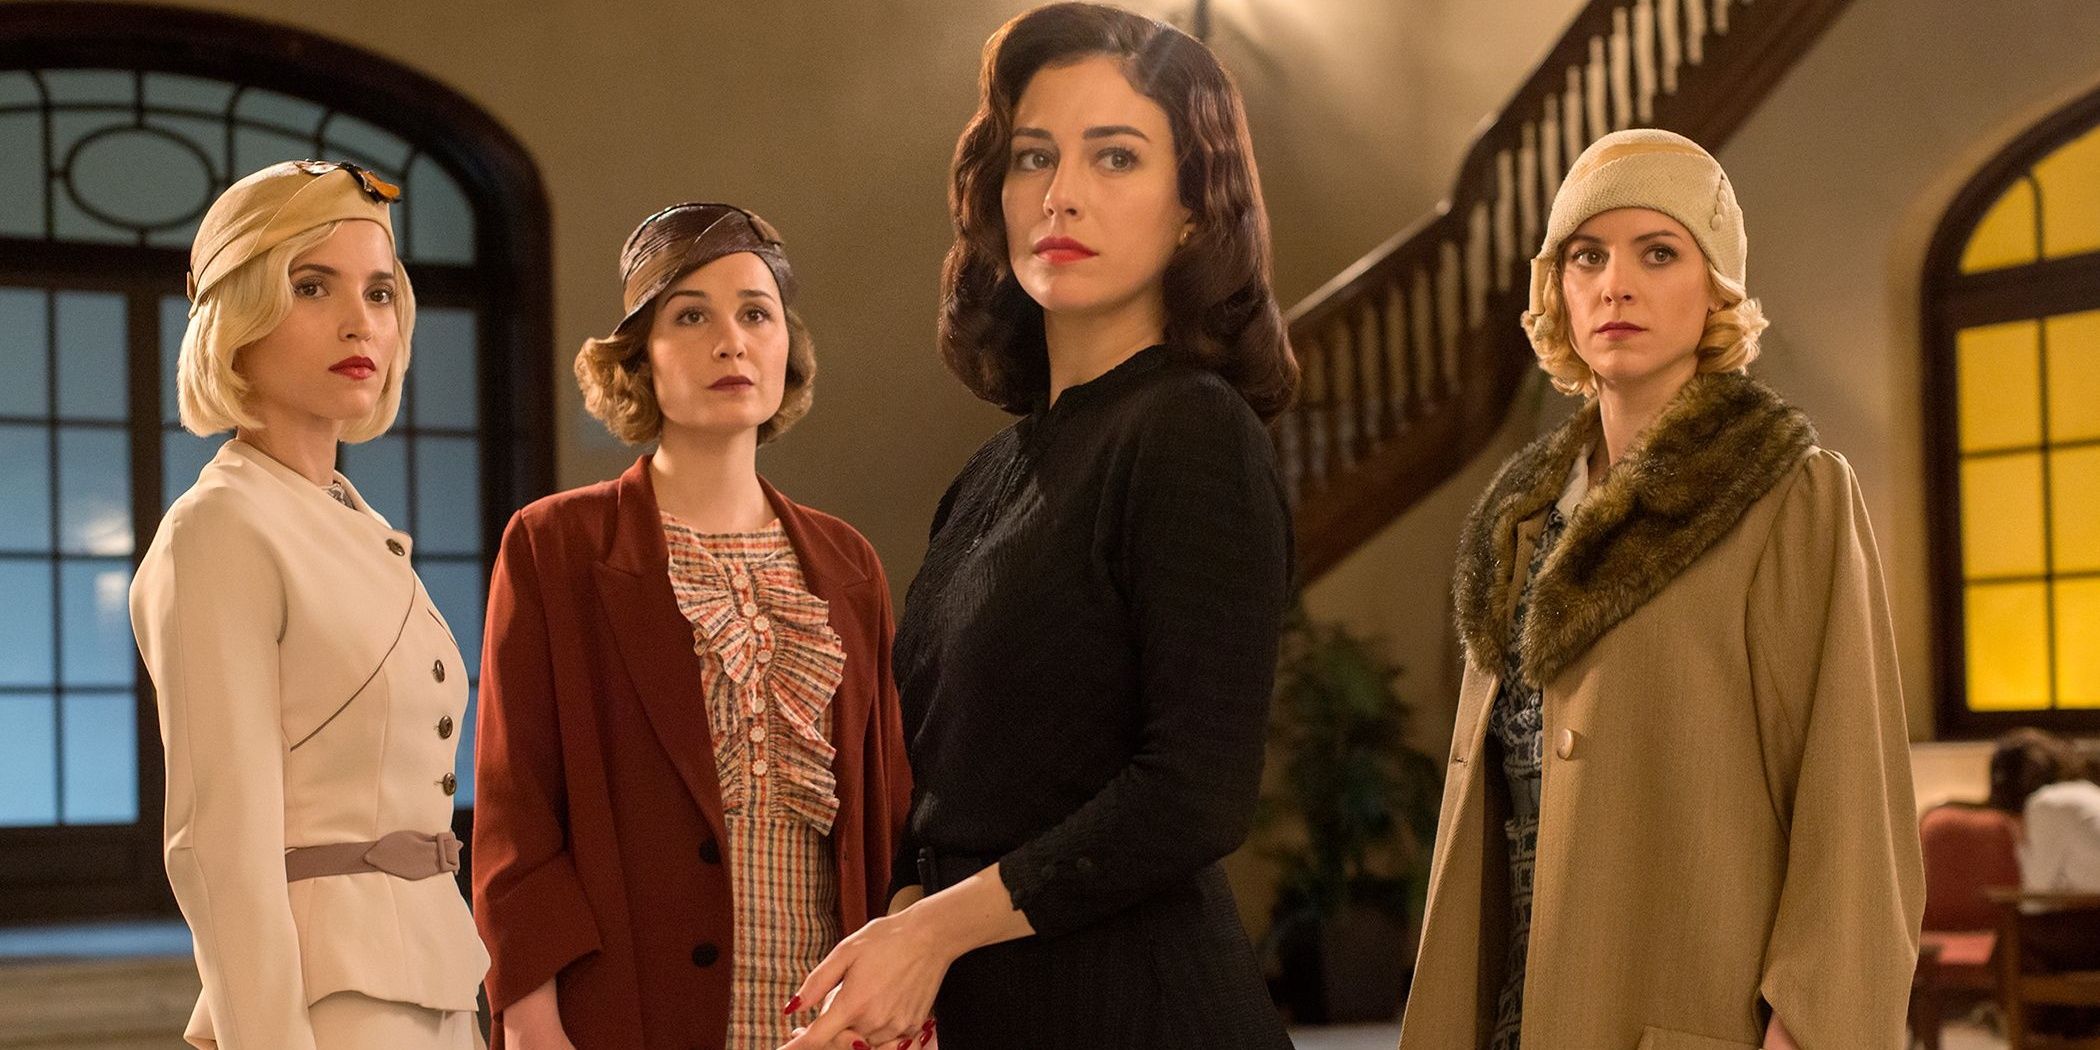 The cast of Cable Girls looking concerned